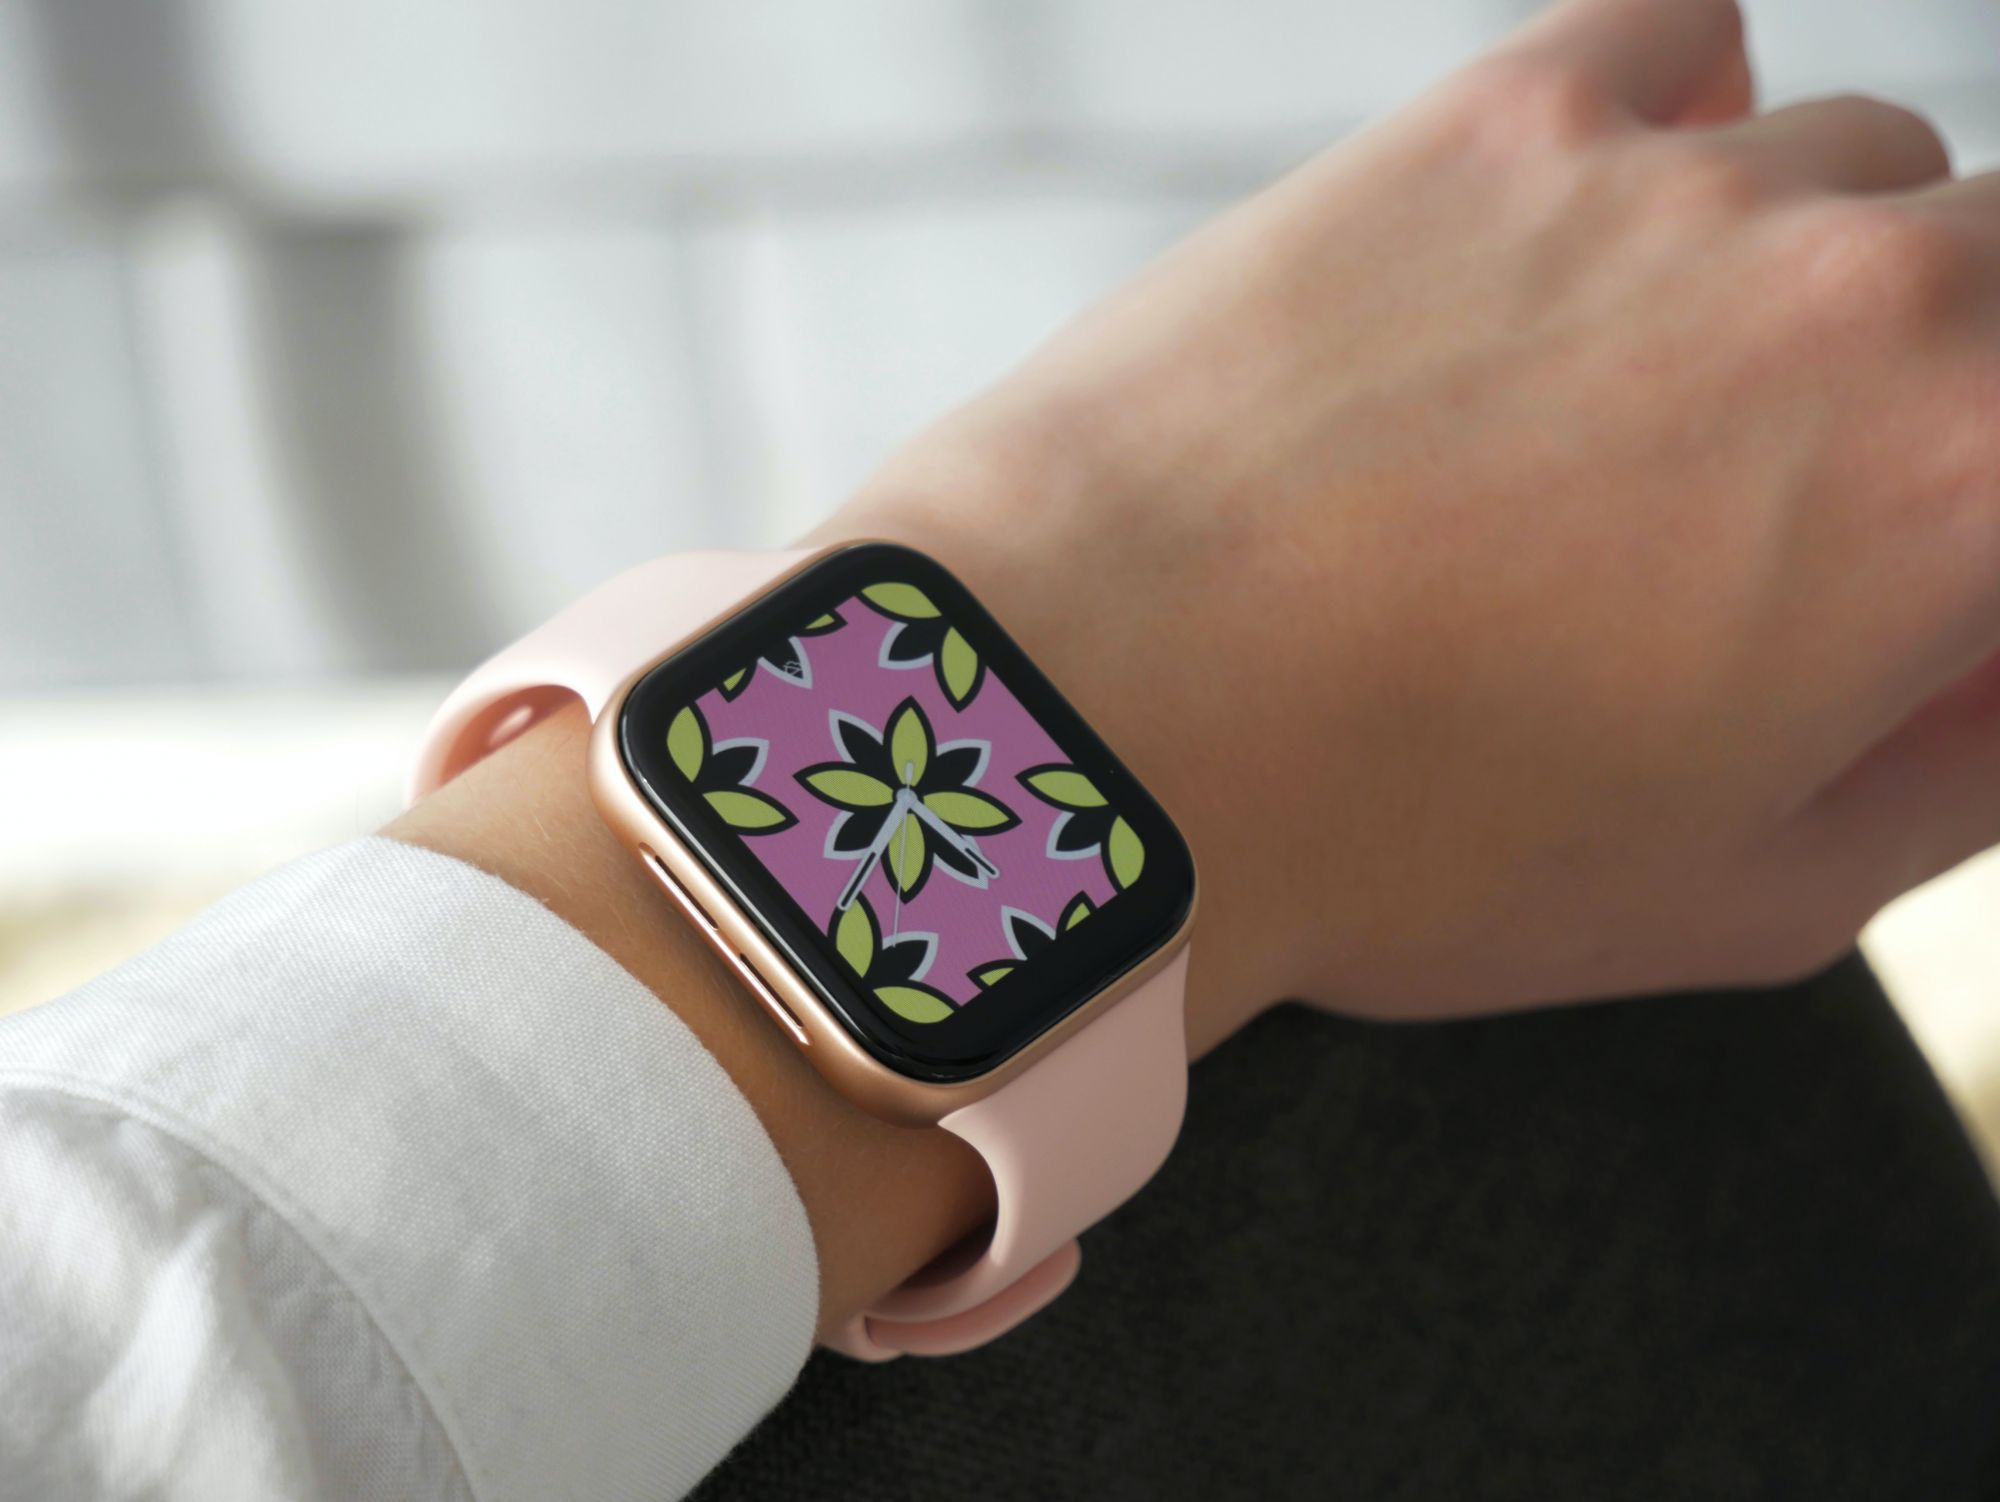 feel-the-vibration-how-a-buzz-on-your-wrist-could-change-smartwatches